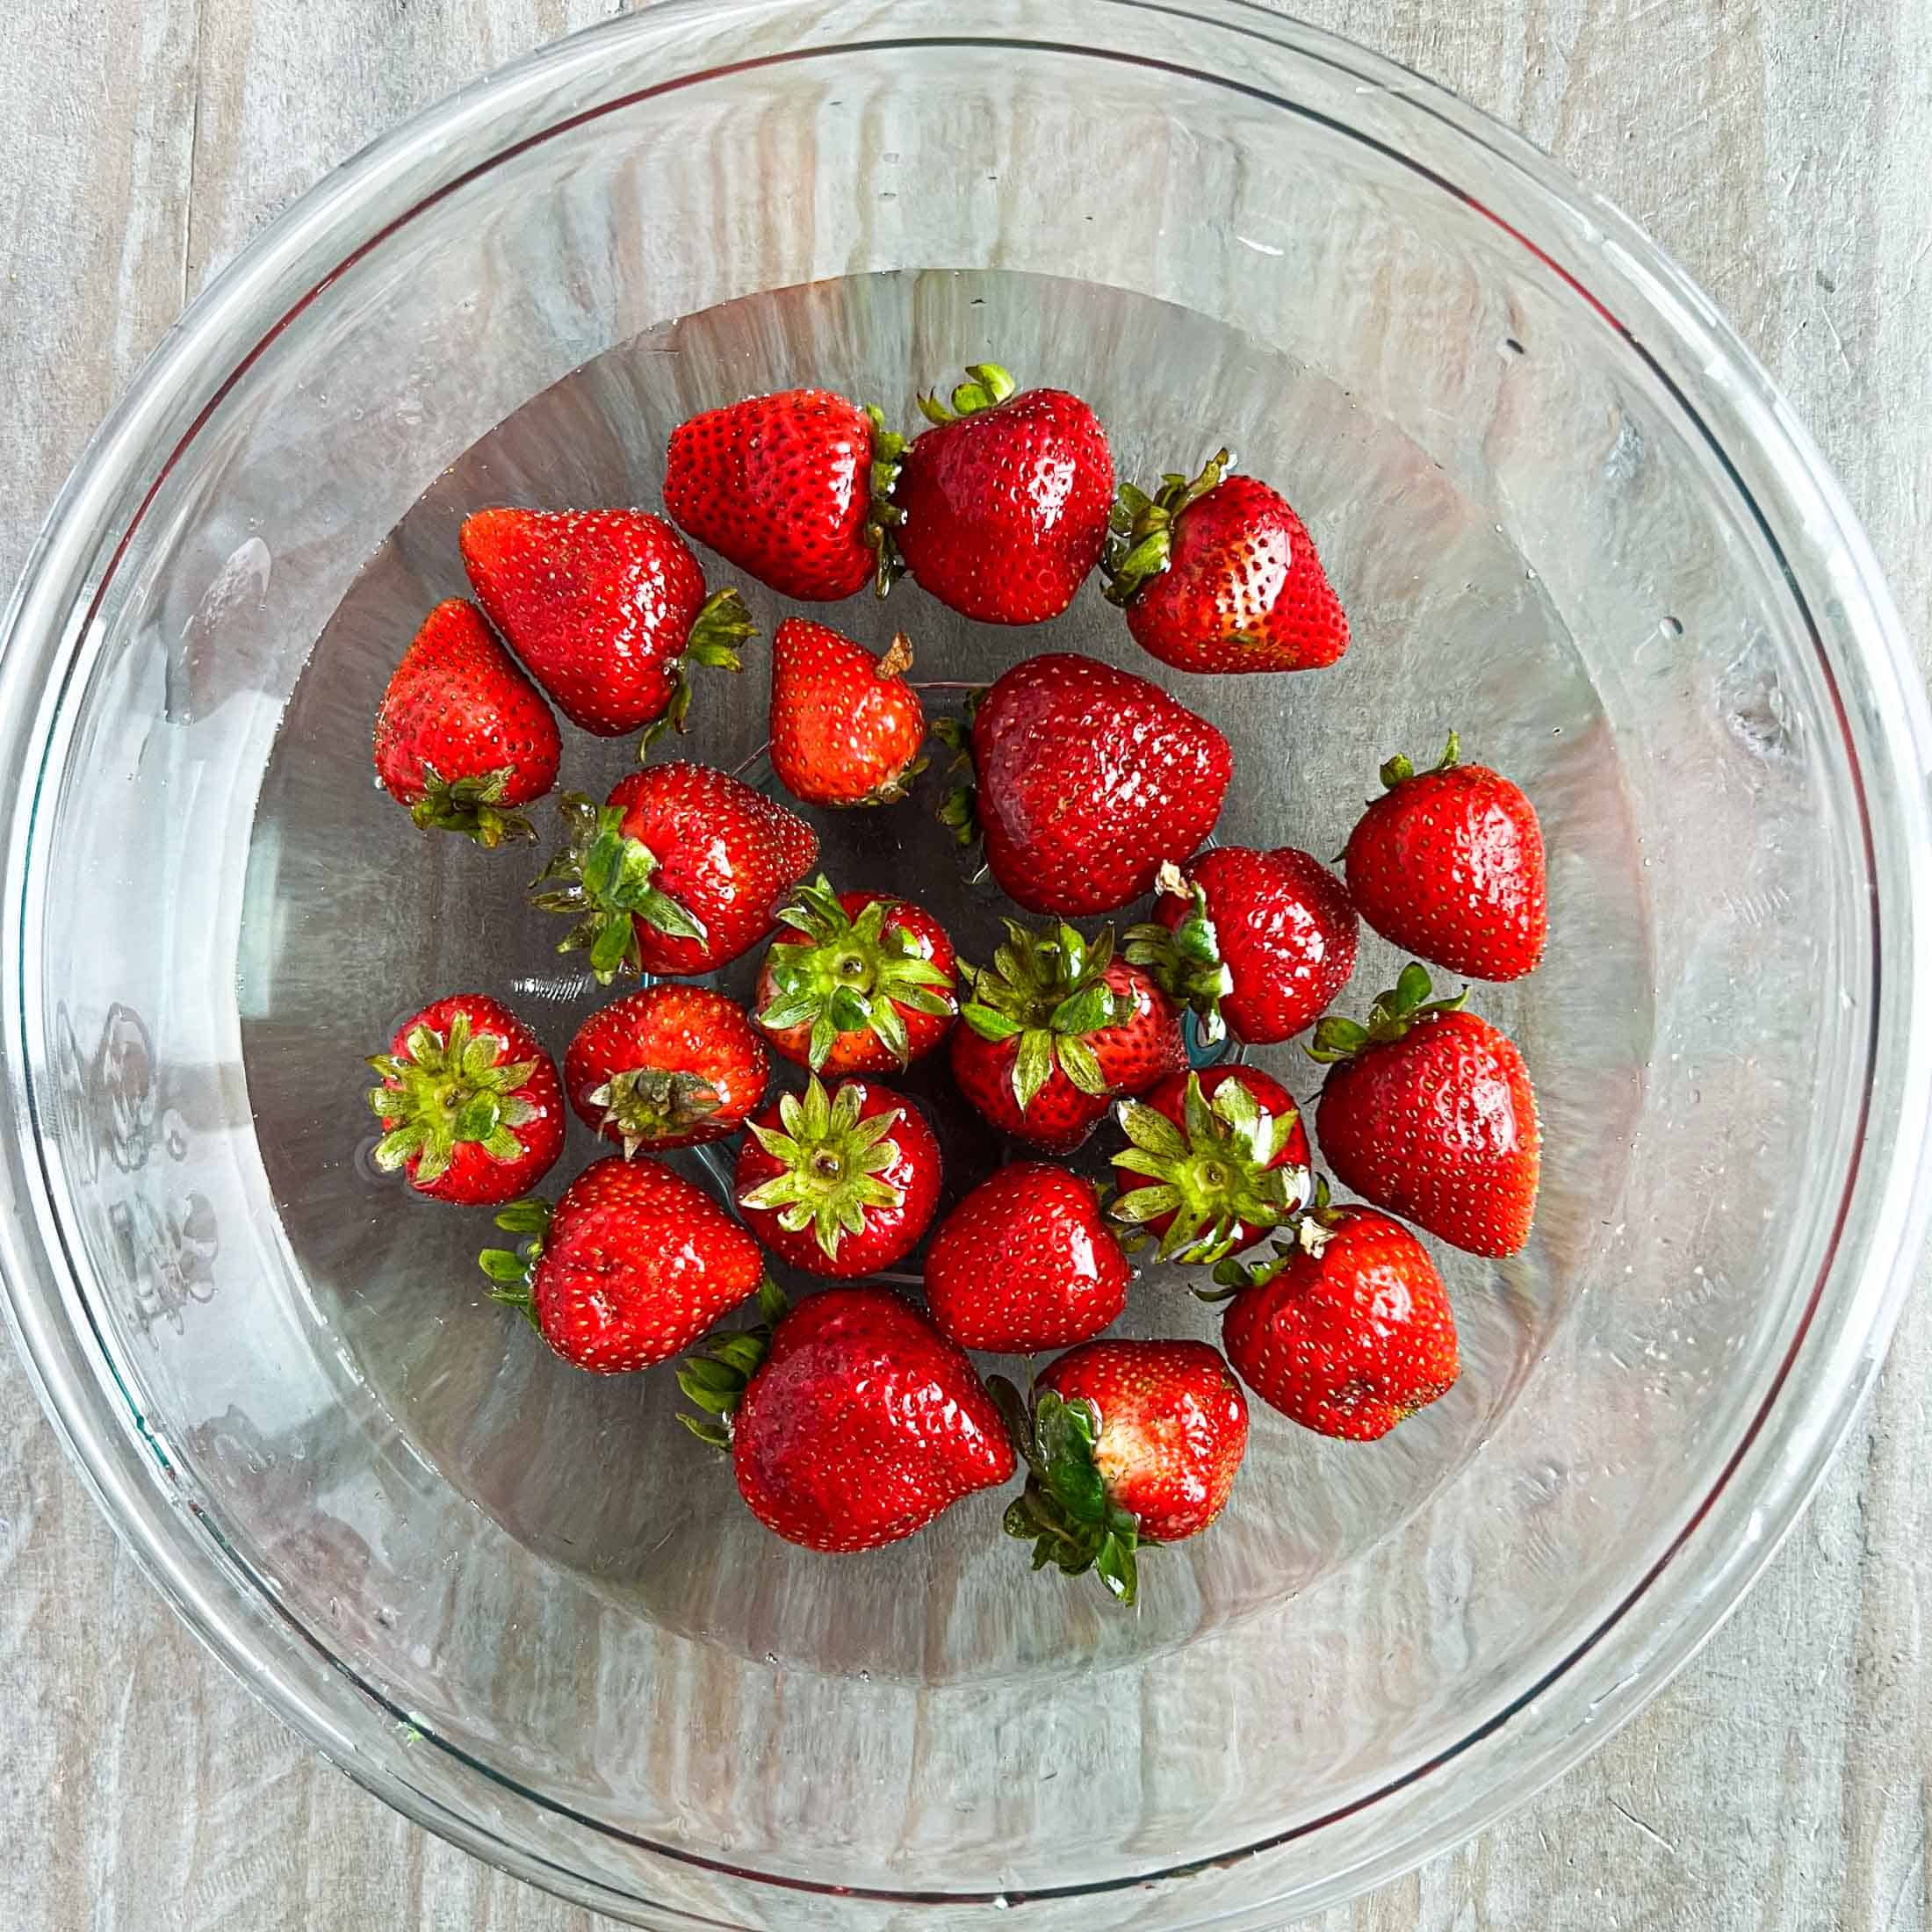 Strawberries in a glass bowl with water.